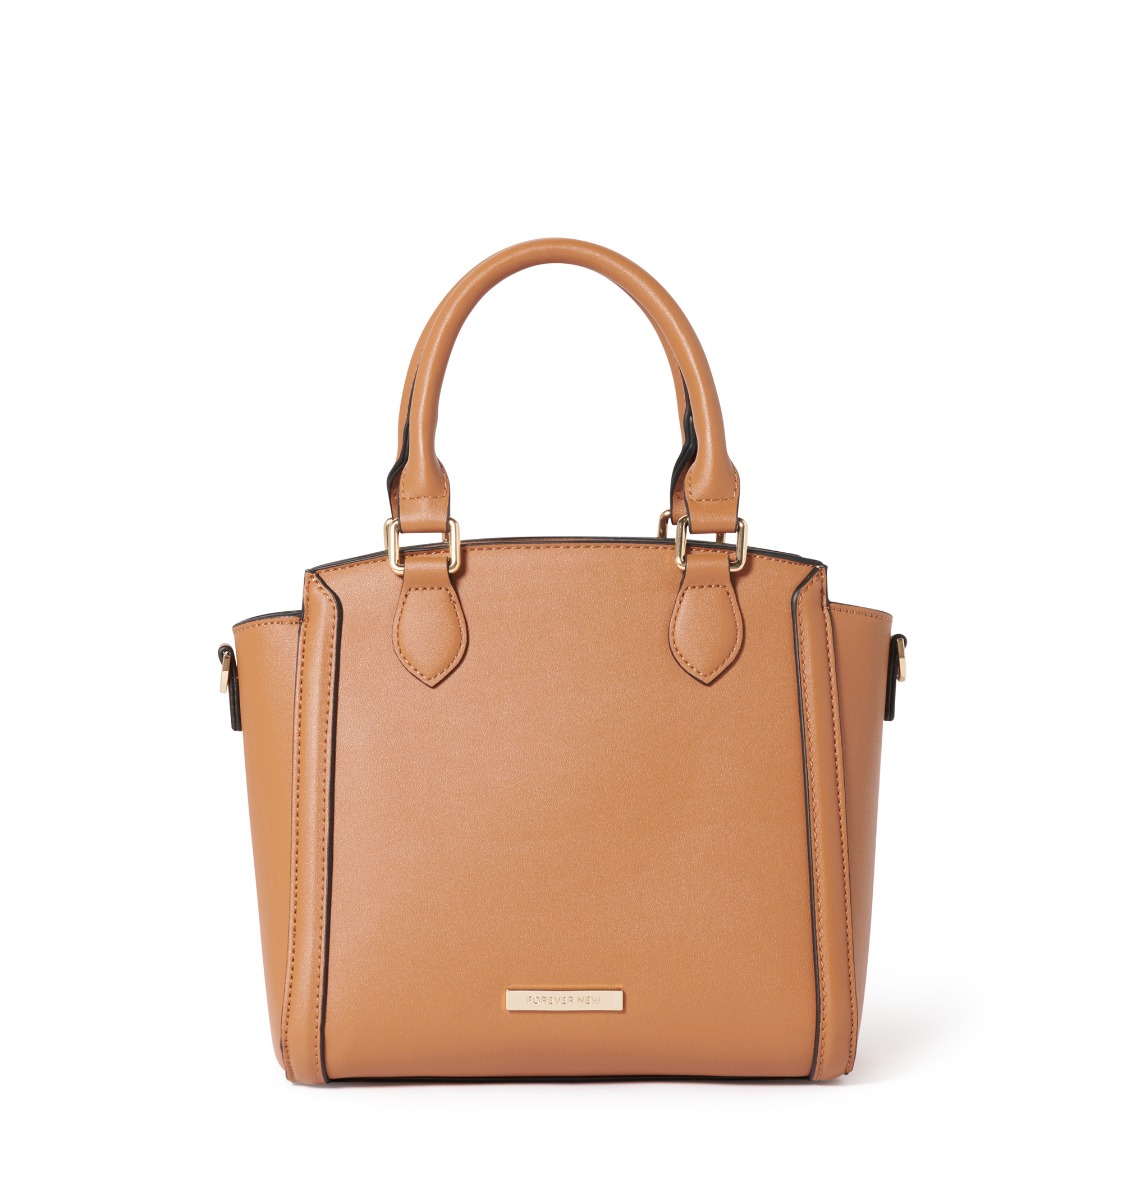 Pu Leather Plain Zara Ladies Hand Bag, 350 Gma Approx, Size: 10 X 12 Inch  at Rs 270/piece in Varanasi